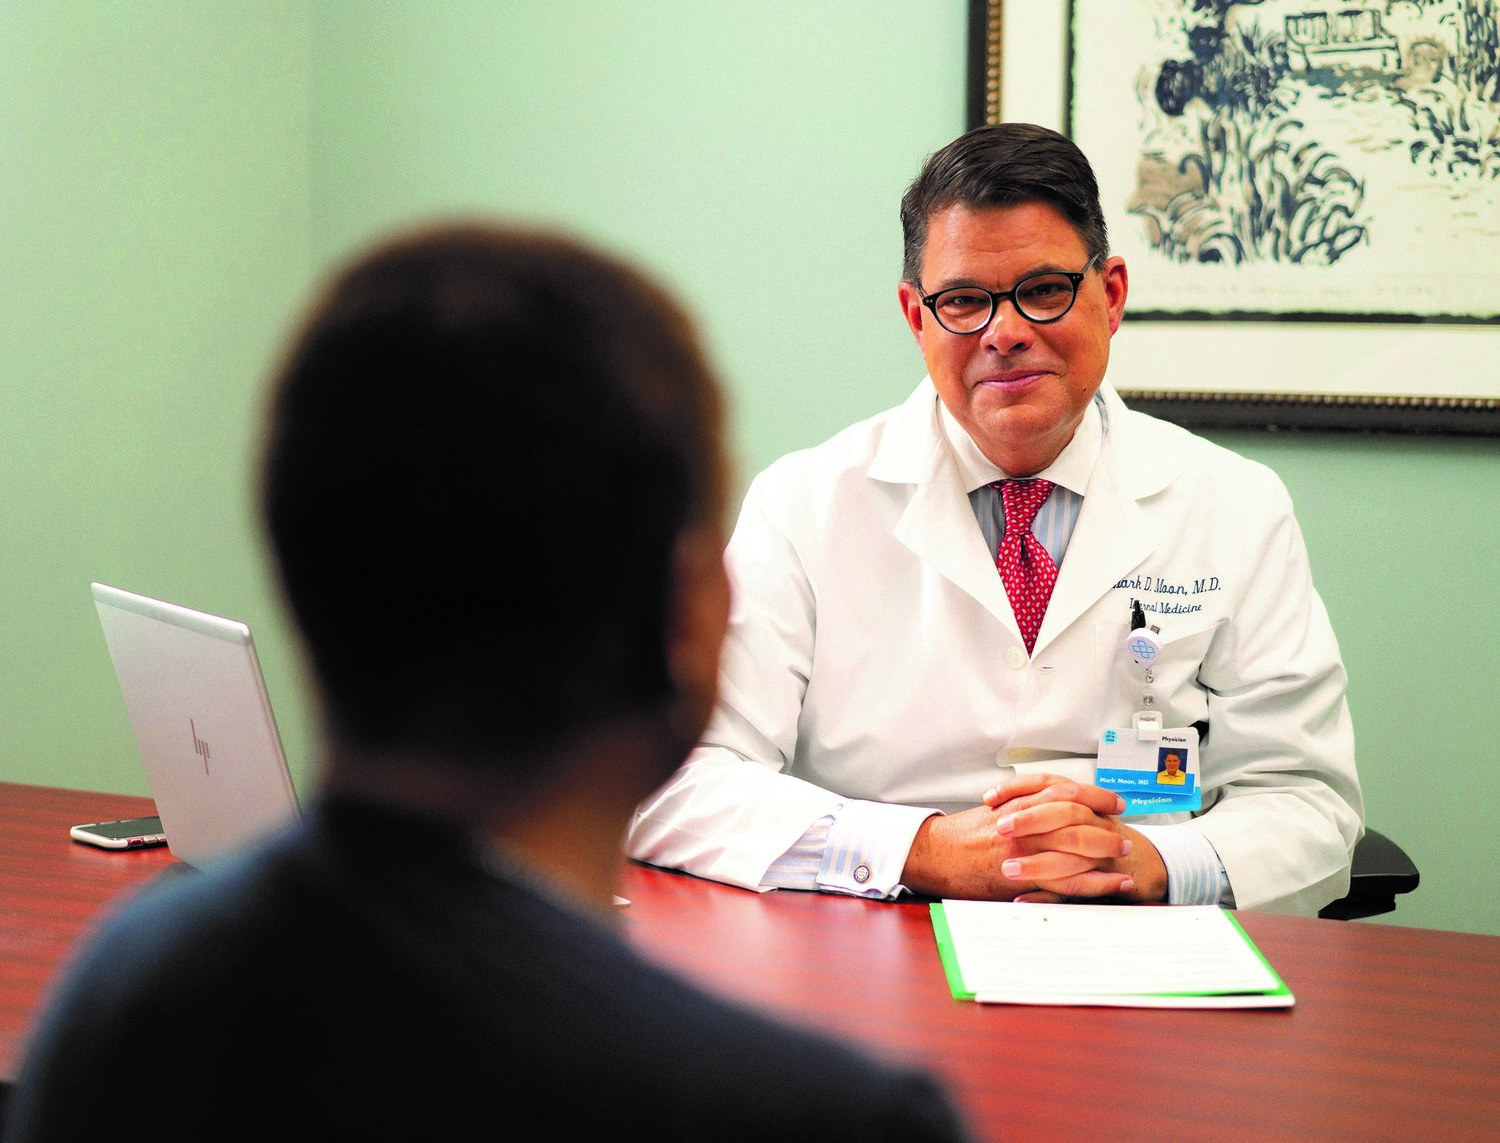 Dr. Mark Moon of Signature+ Concierge Care offers a highly individualized approach to medicine reminiscent of the physician-patient relationships of the past.